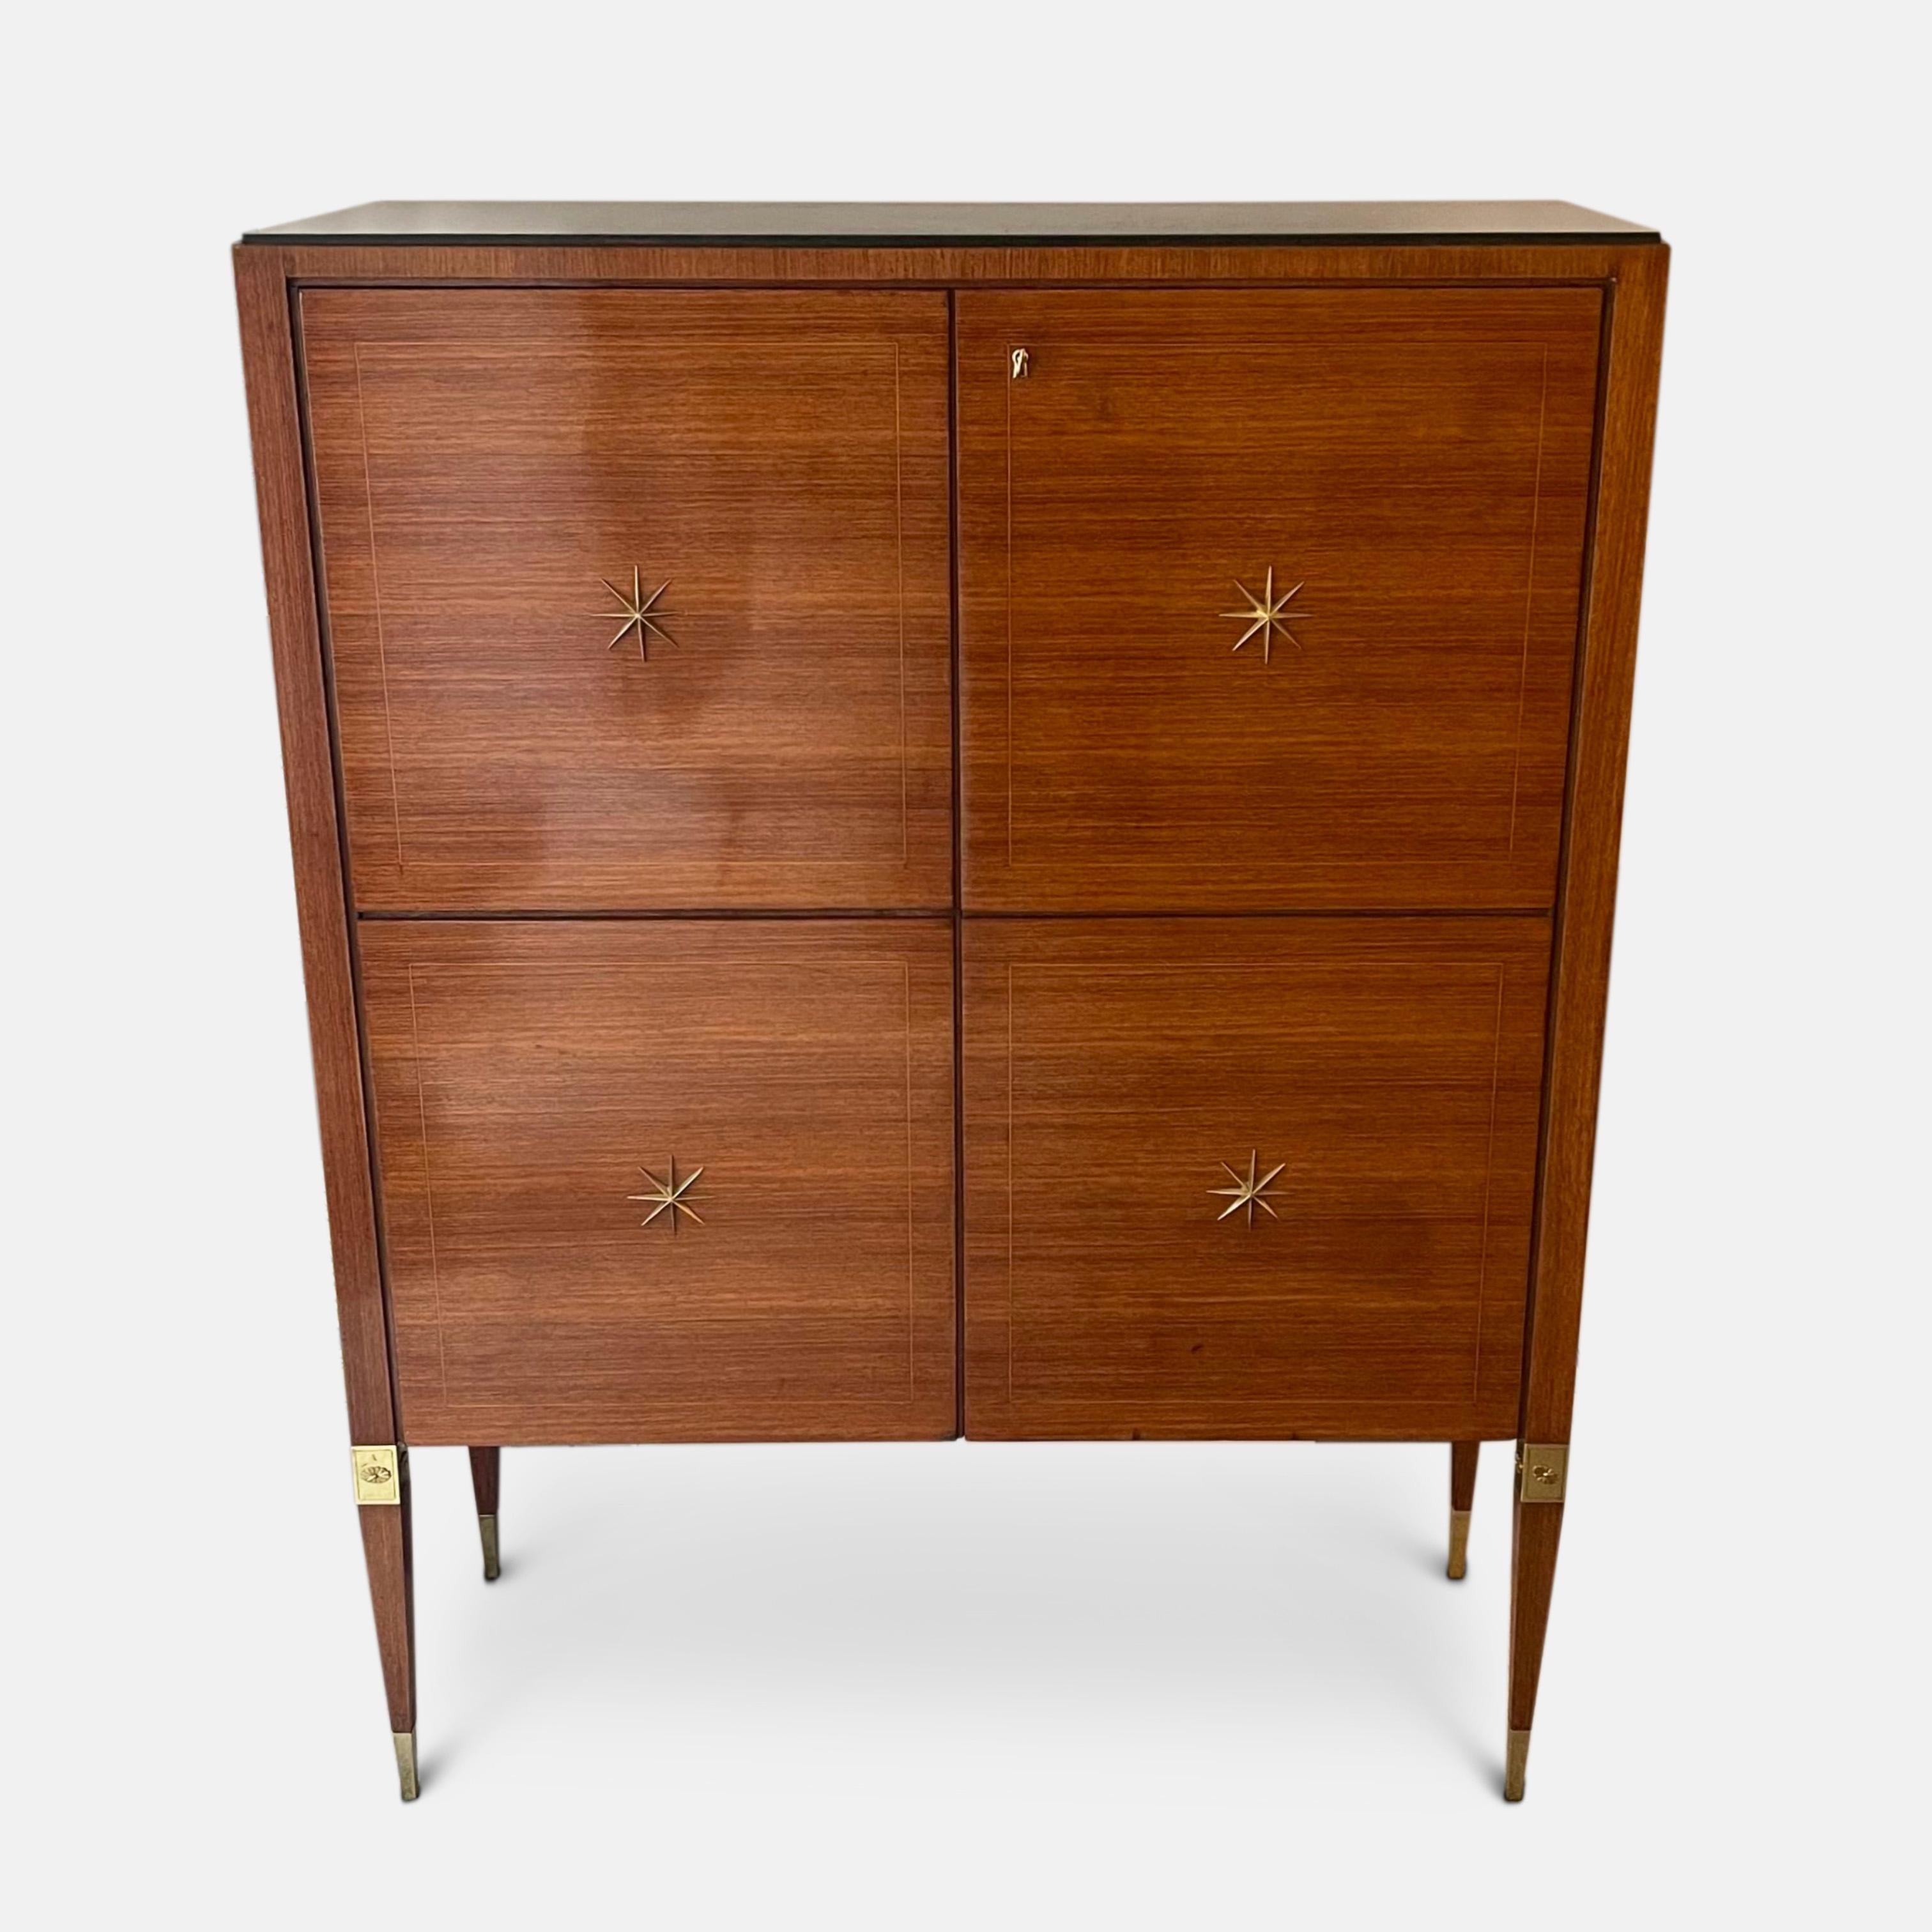 A fine 1940s Italian cabinet by Paolo Buffa 
Resting on slender tapered legs with deep brass sabot feet. This piece has wonderful four panelled doors finished in horizontal book matched veneer, each panel is surrounded with the subtlest band of